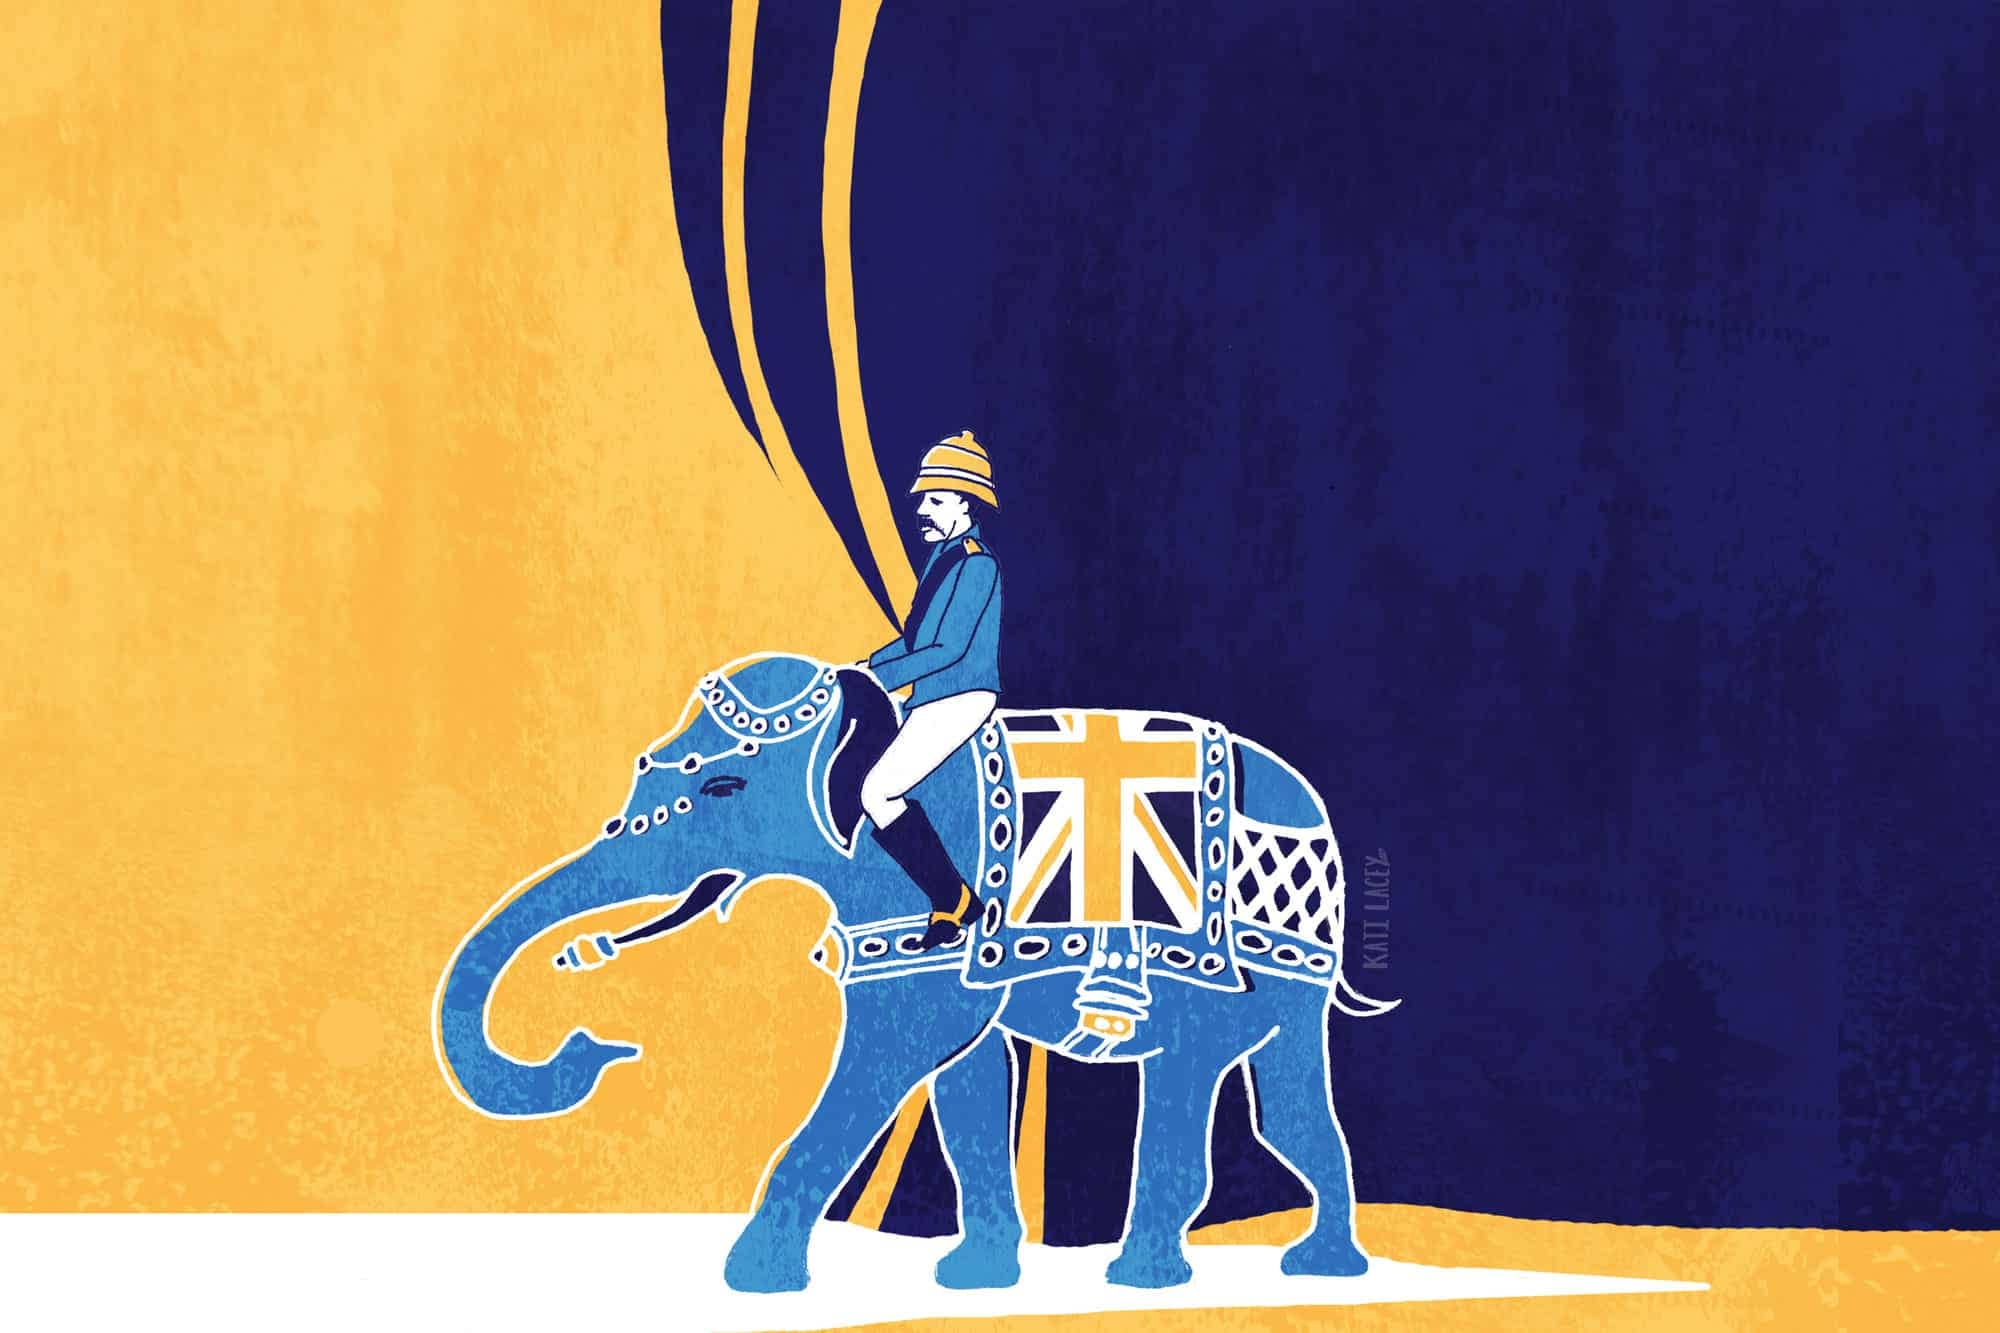 UncomfEMPIRE-TOUR_Uncomfortable-Oxford-Indian elephant- british officer - british flag